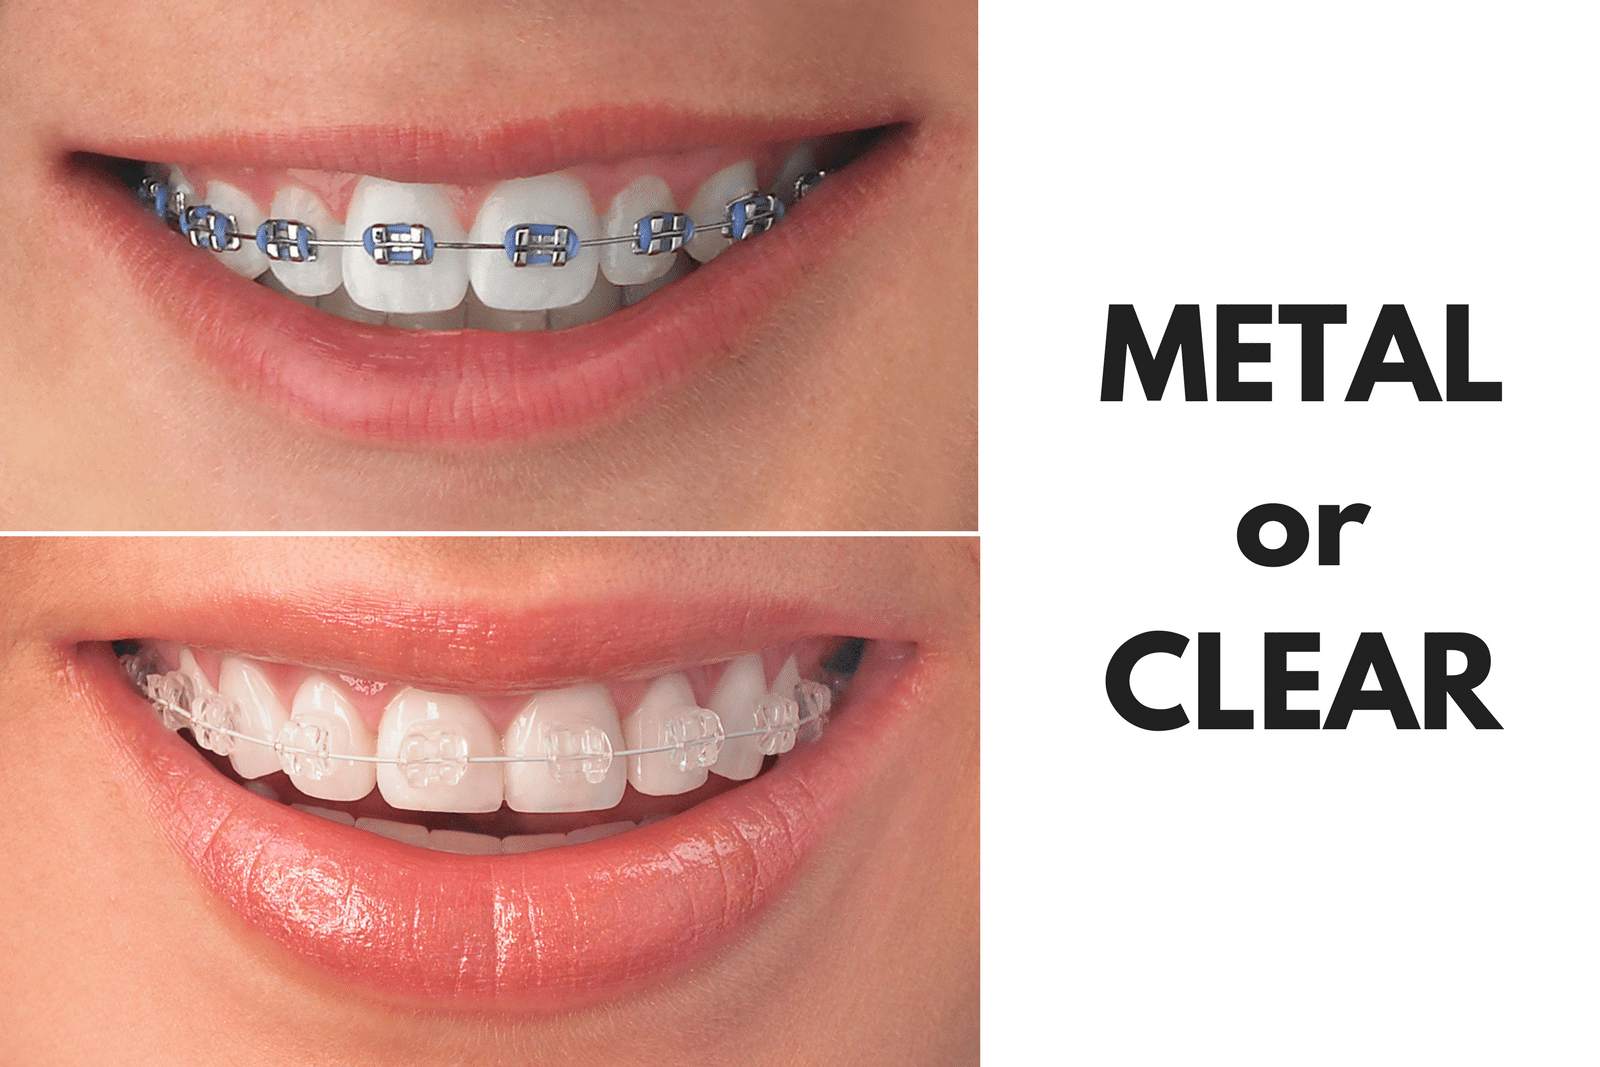 Ask Your Robstown Dentist: Should I Get Metal or Clear Braces?